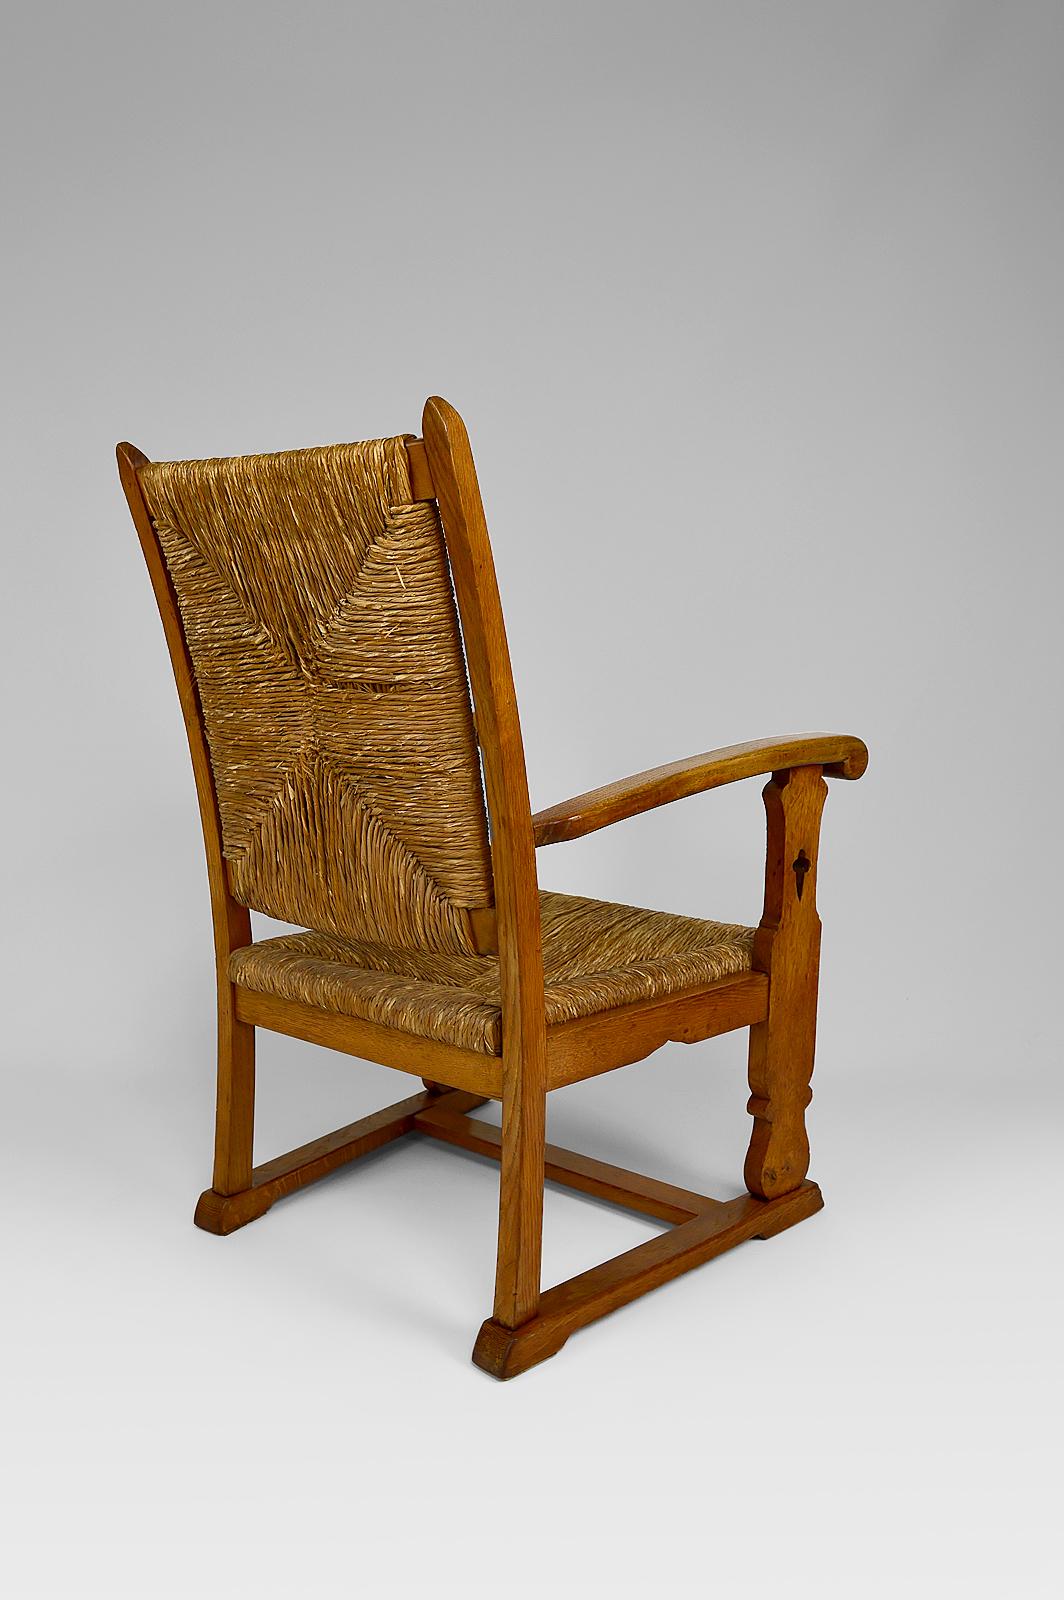 Art & Crafts / Gothic Revival Armchair in Oak and Straw, circa 1900 1